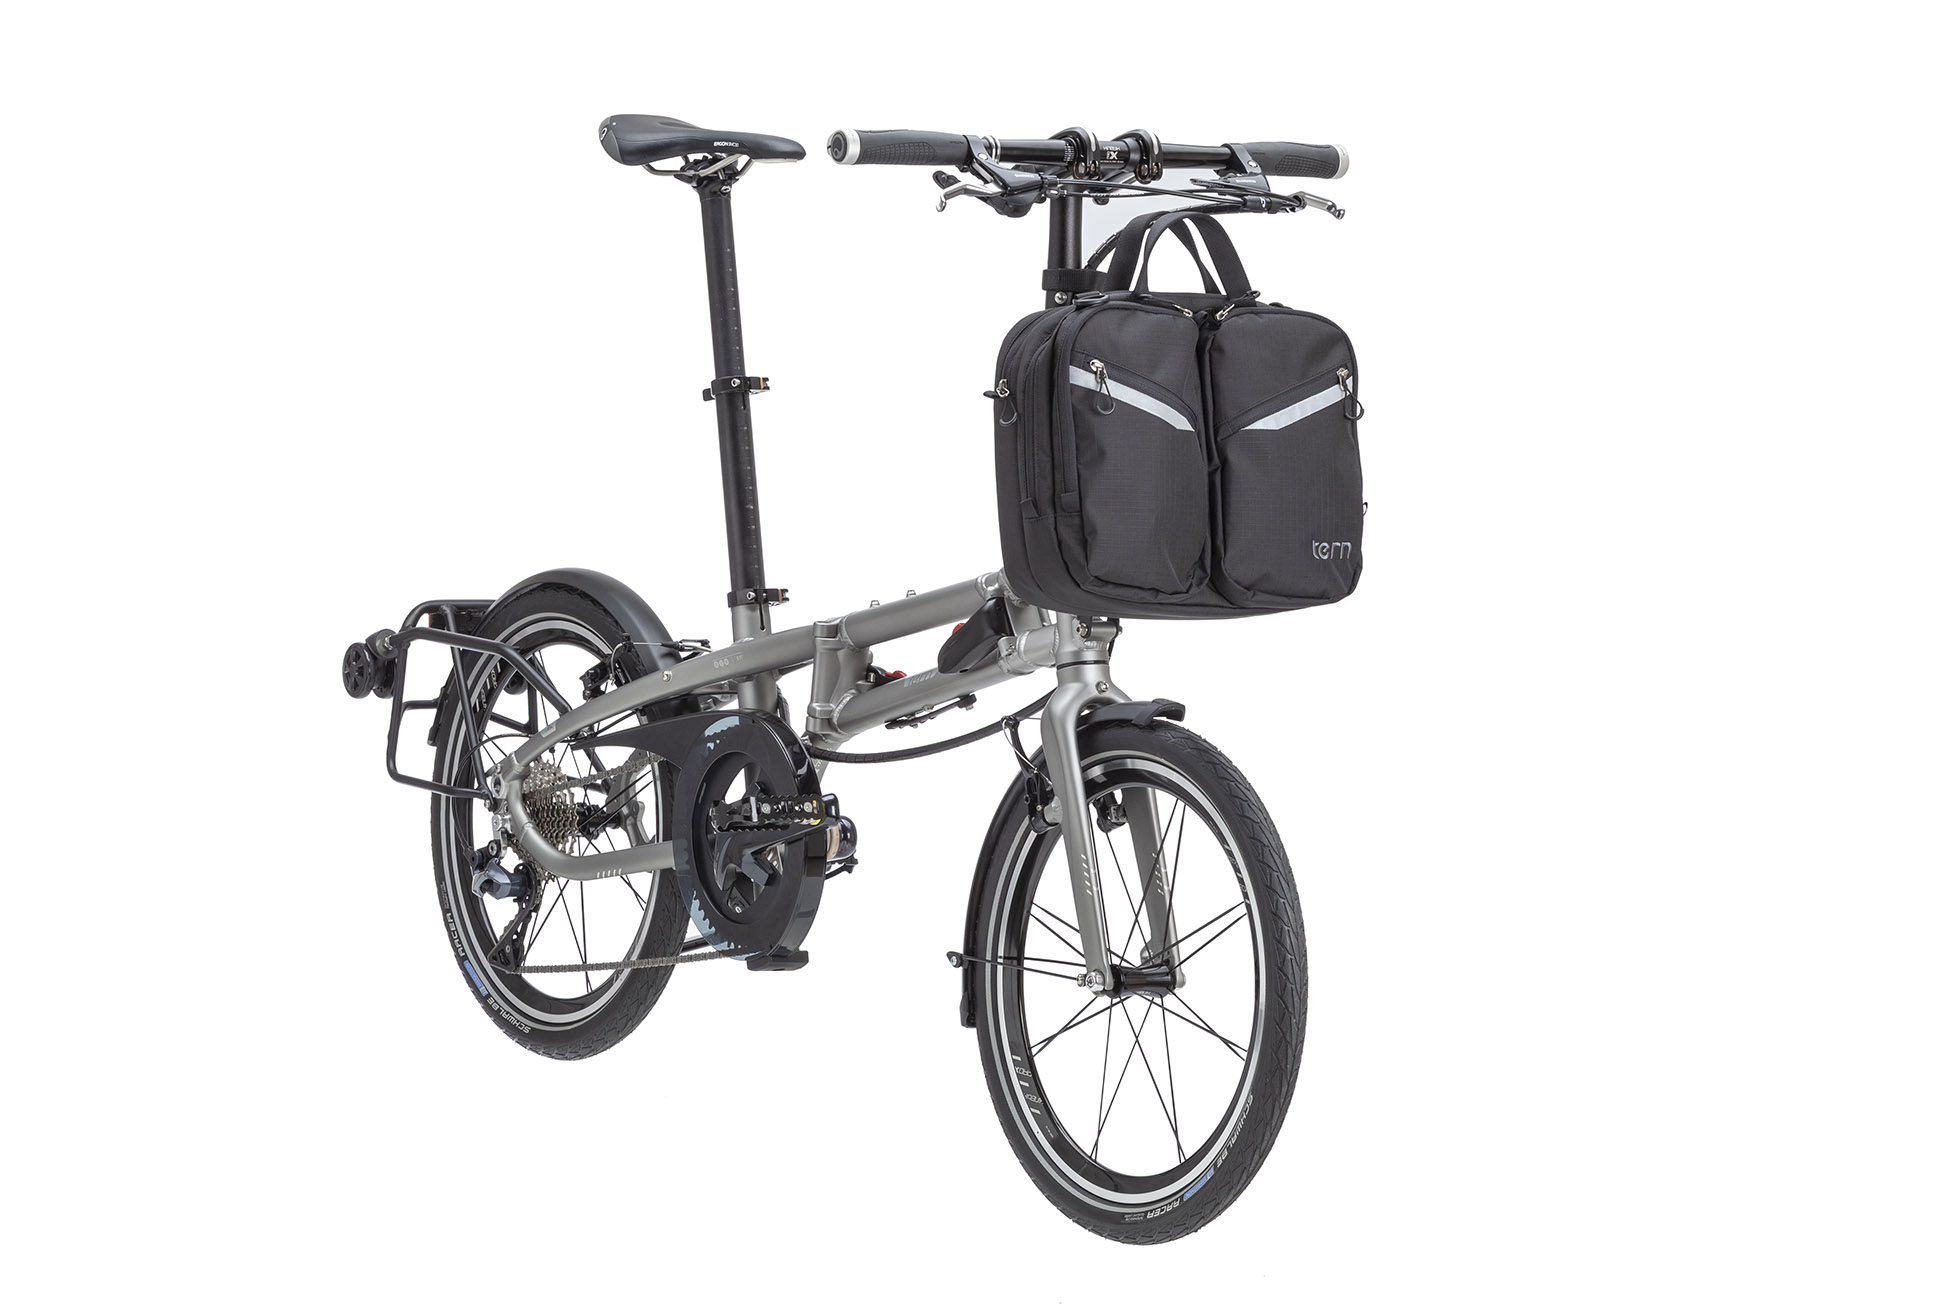 HQ Bag: Office bag that attaches to Tern Bikes | Tern Bicycles